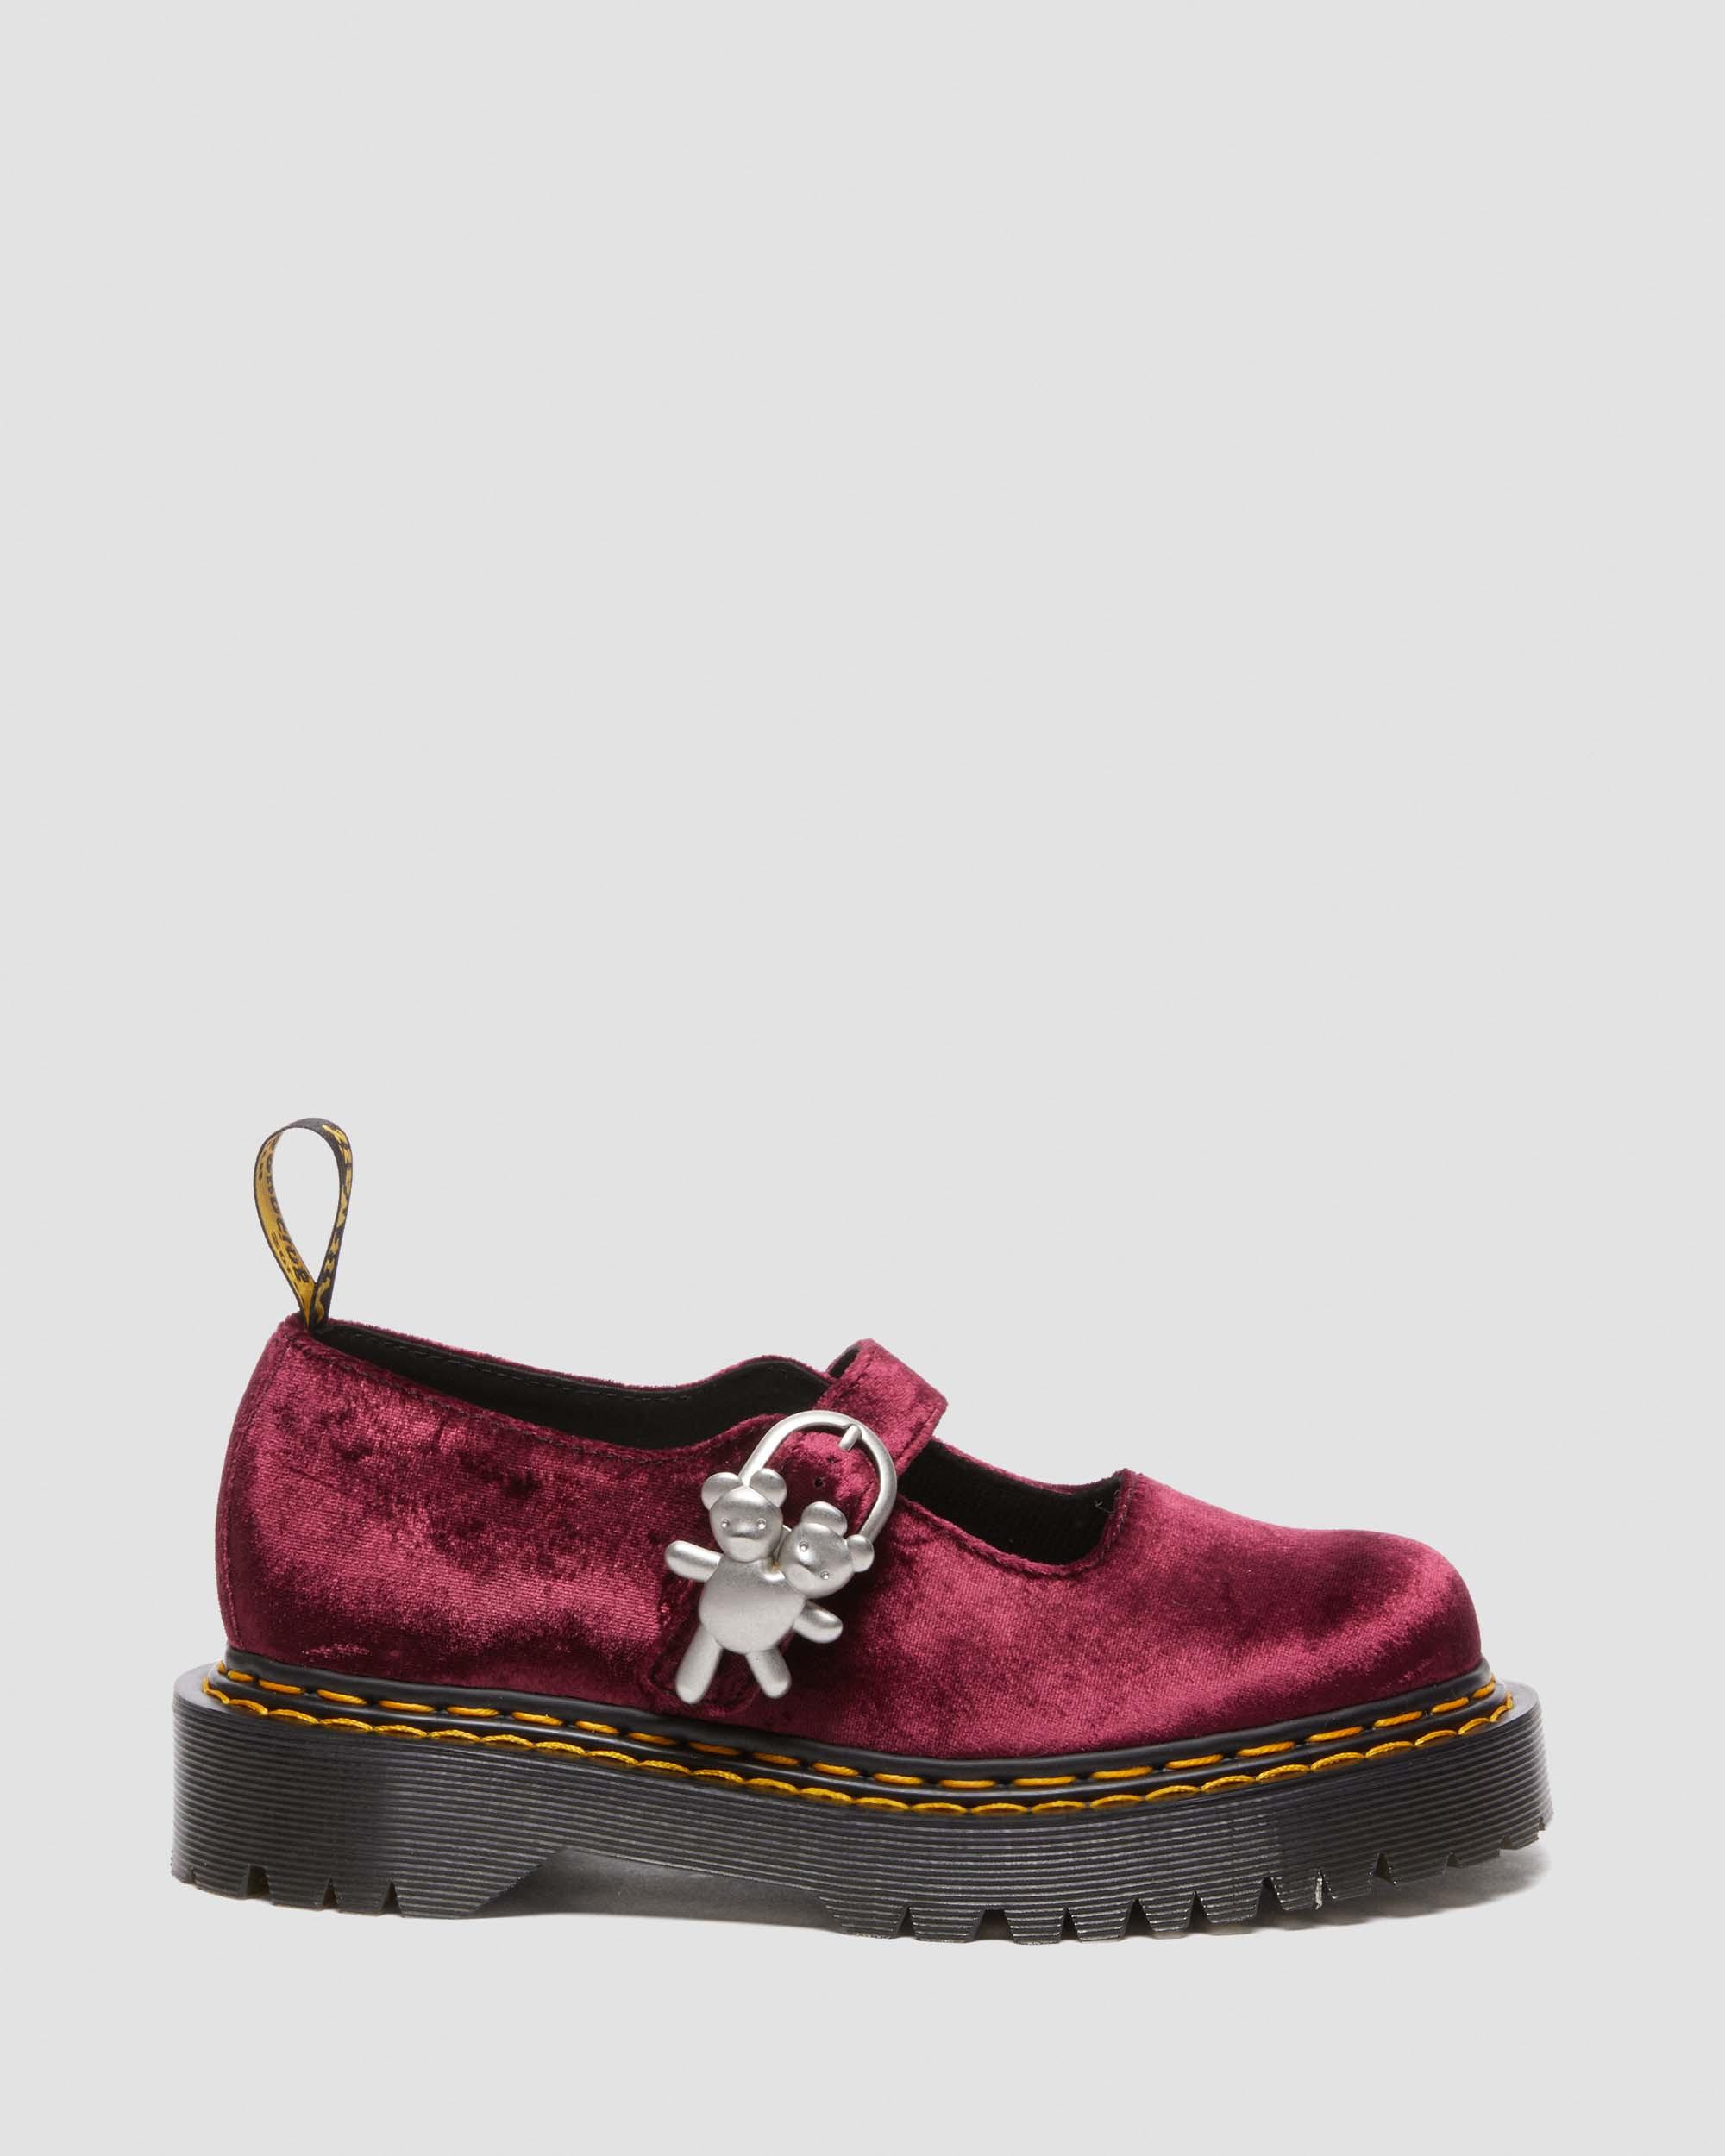 Addina Heaven by Marc Jacobs Velvet Shoes in Cherry Red